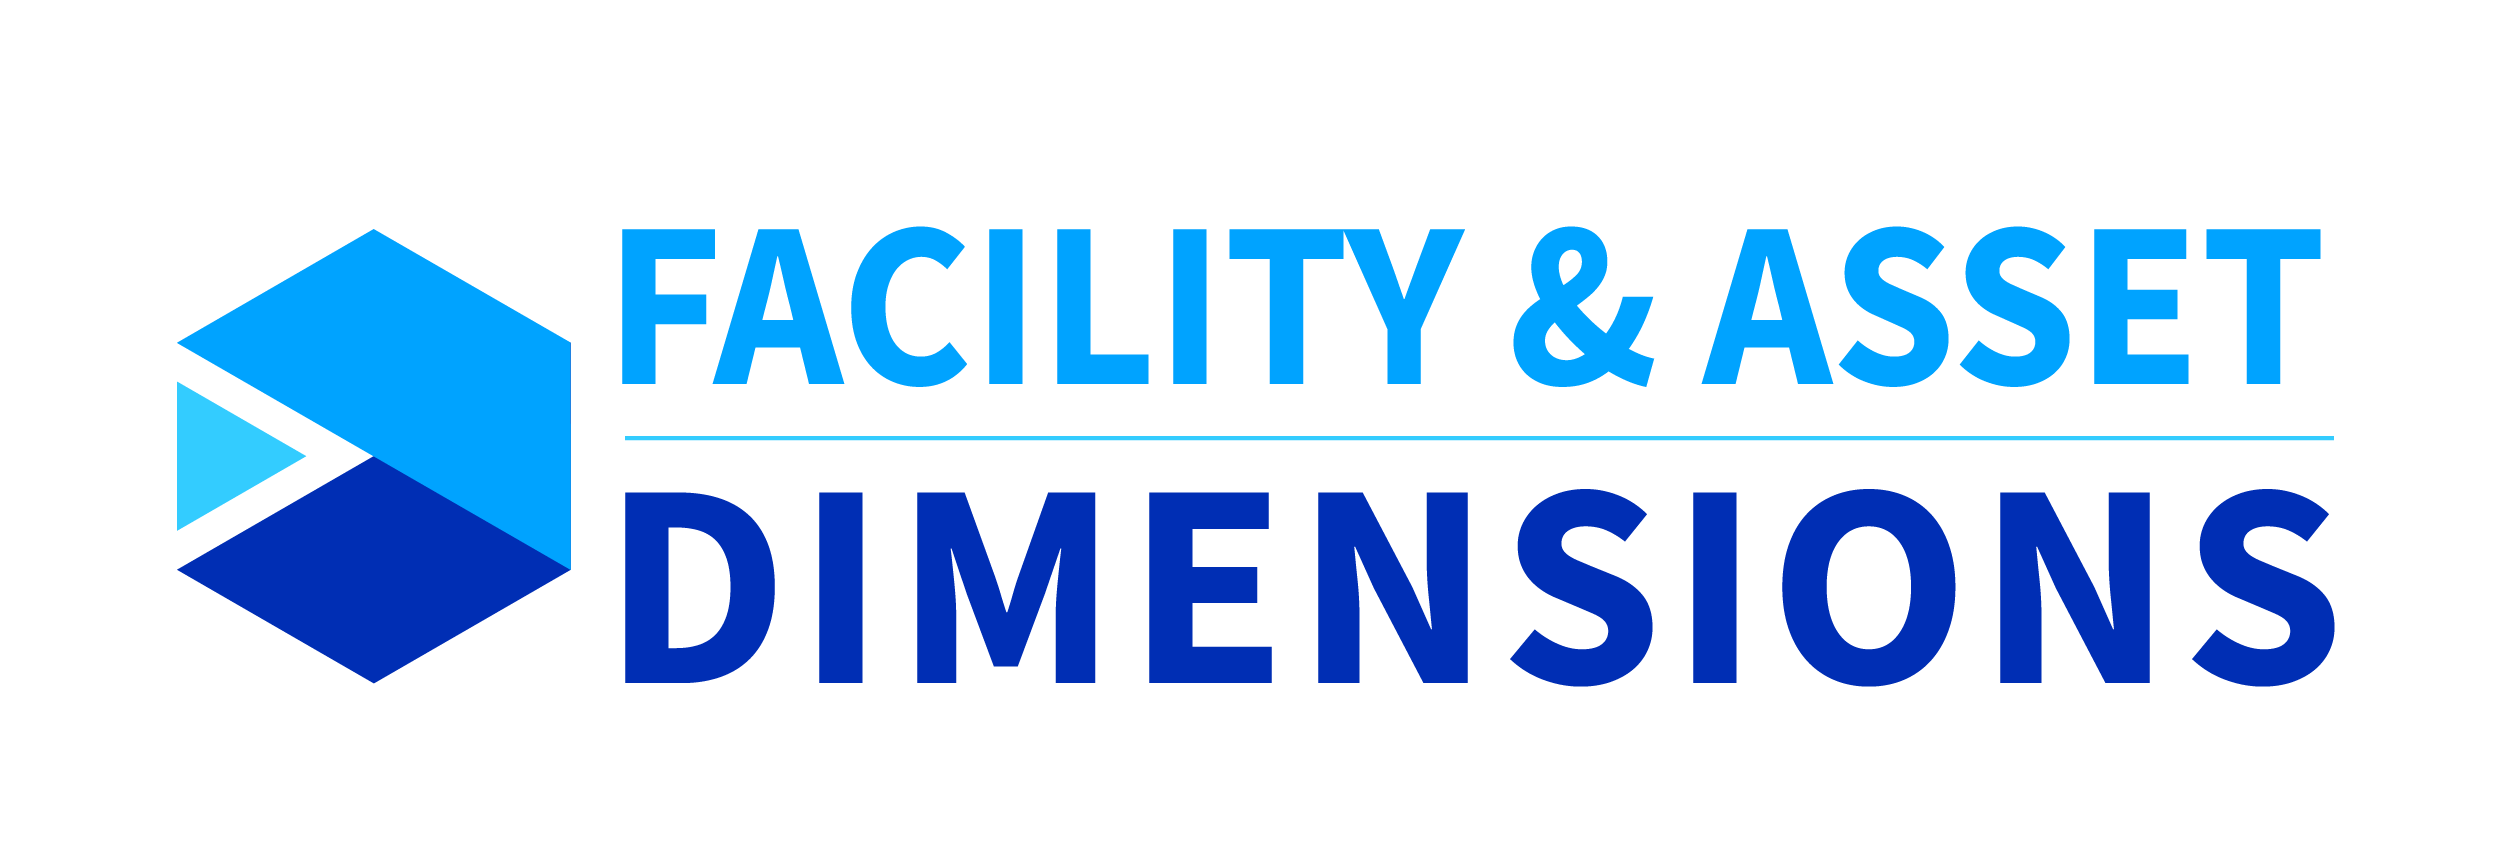 Acceltech - Facility and Assets Dimensions